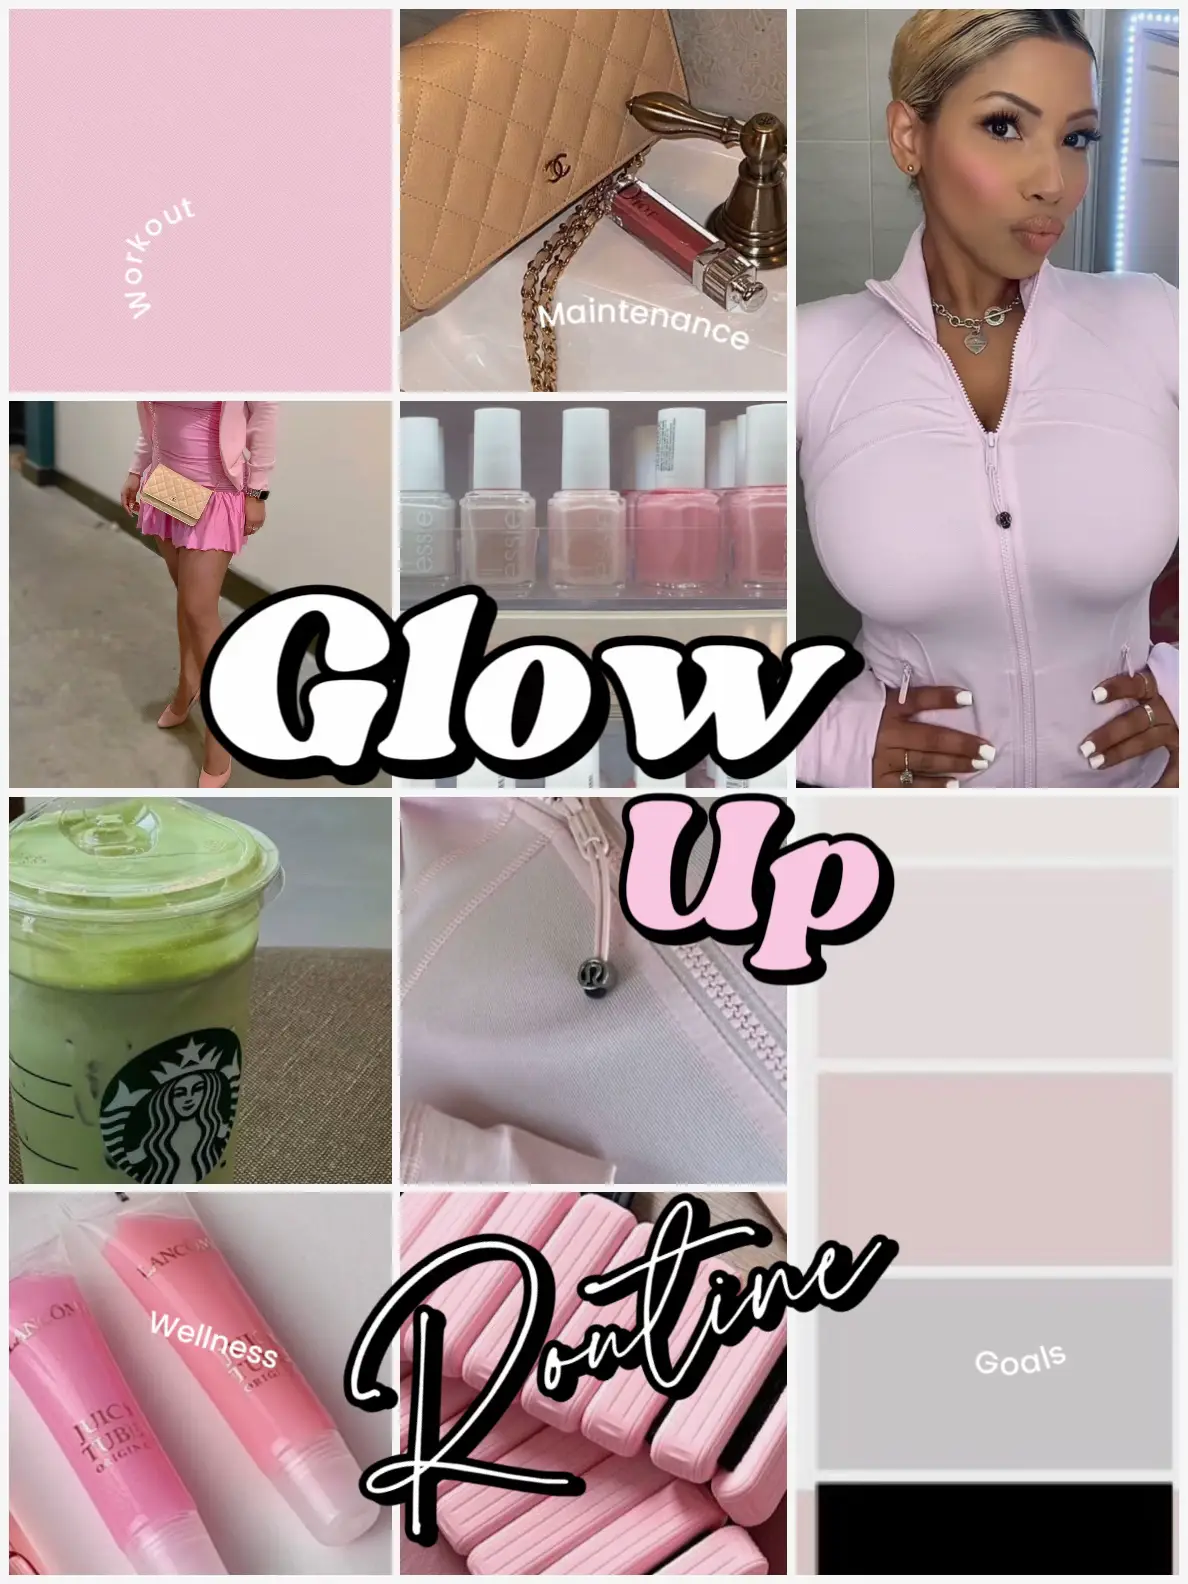 Glow up tips / Glow up checklist / Glow up aesthetic